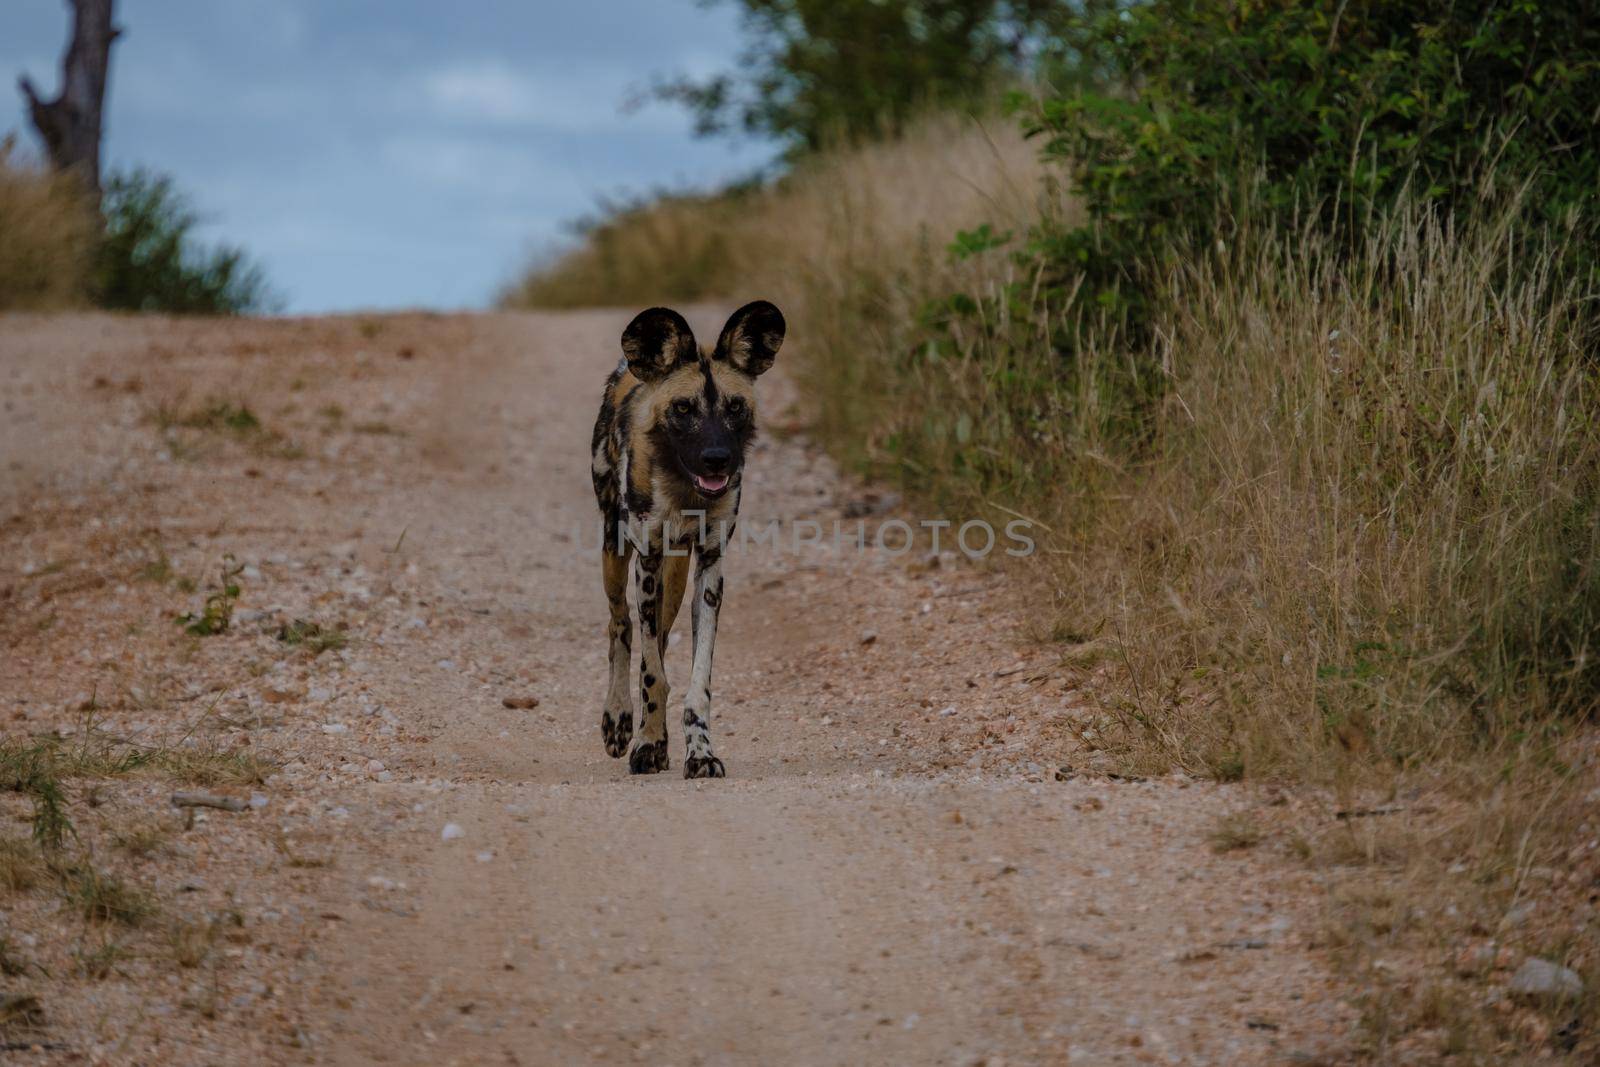 Wild dog at the Klaserie Private Nature Reserve part of the Kruger national park in South Africa. wild dog safari animals